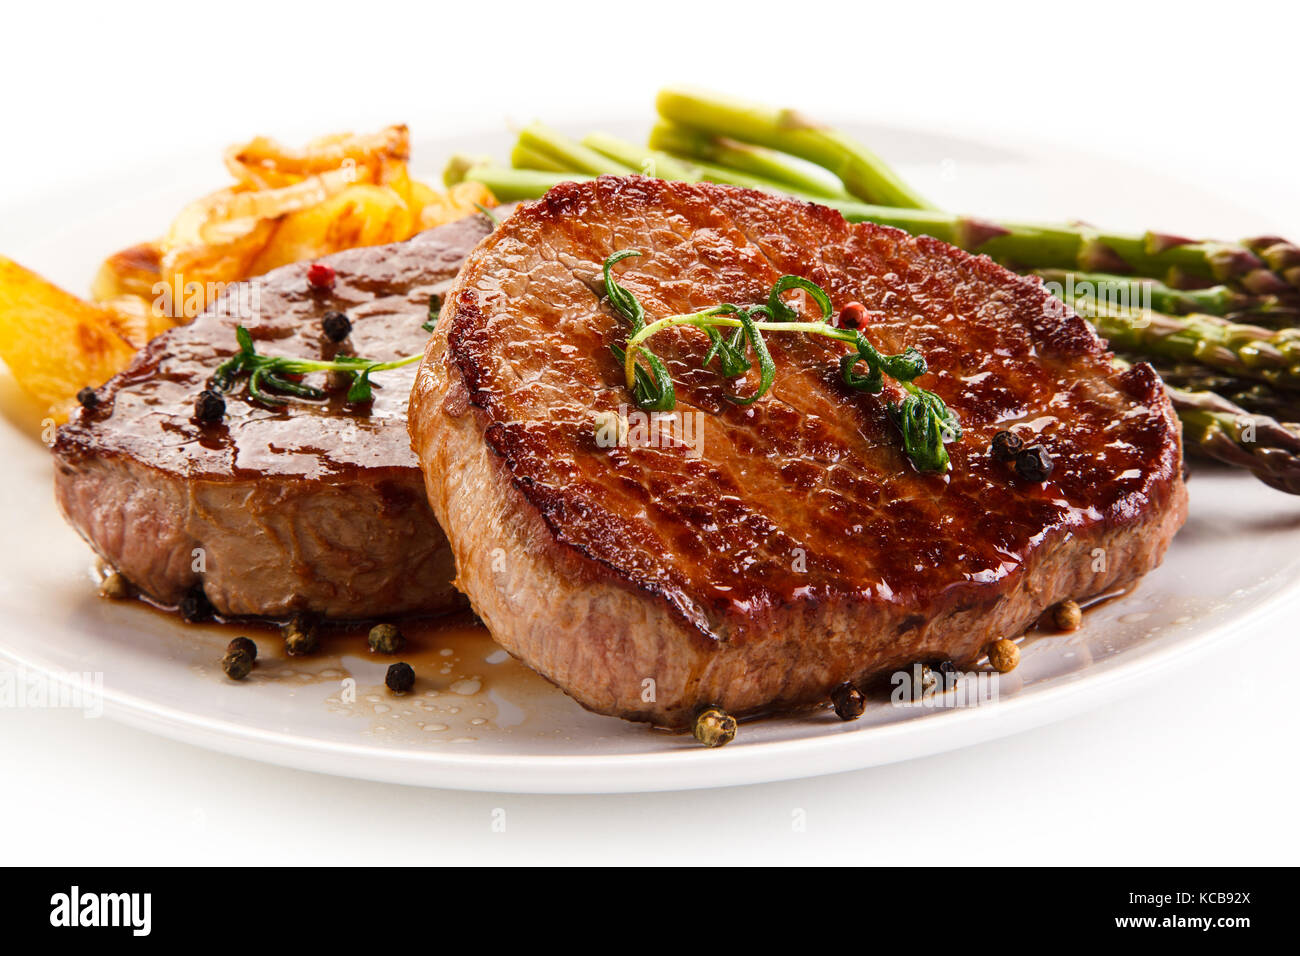 Grilled beef steaks,chips and asparagus on white background Stock Photo